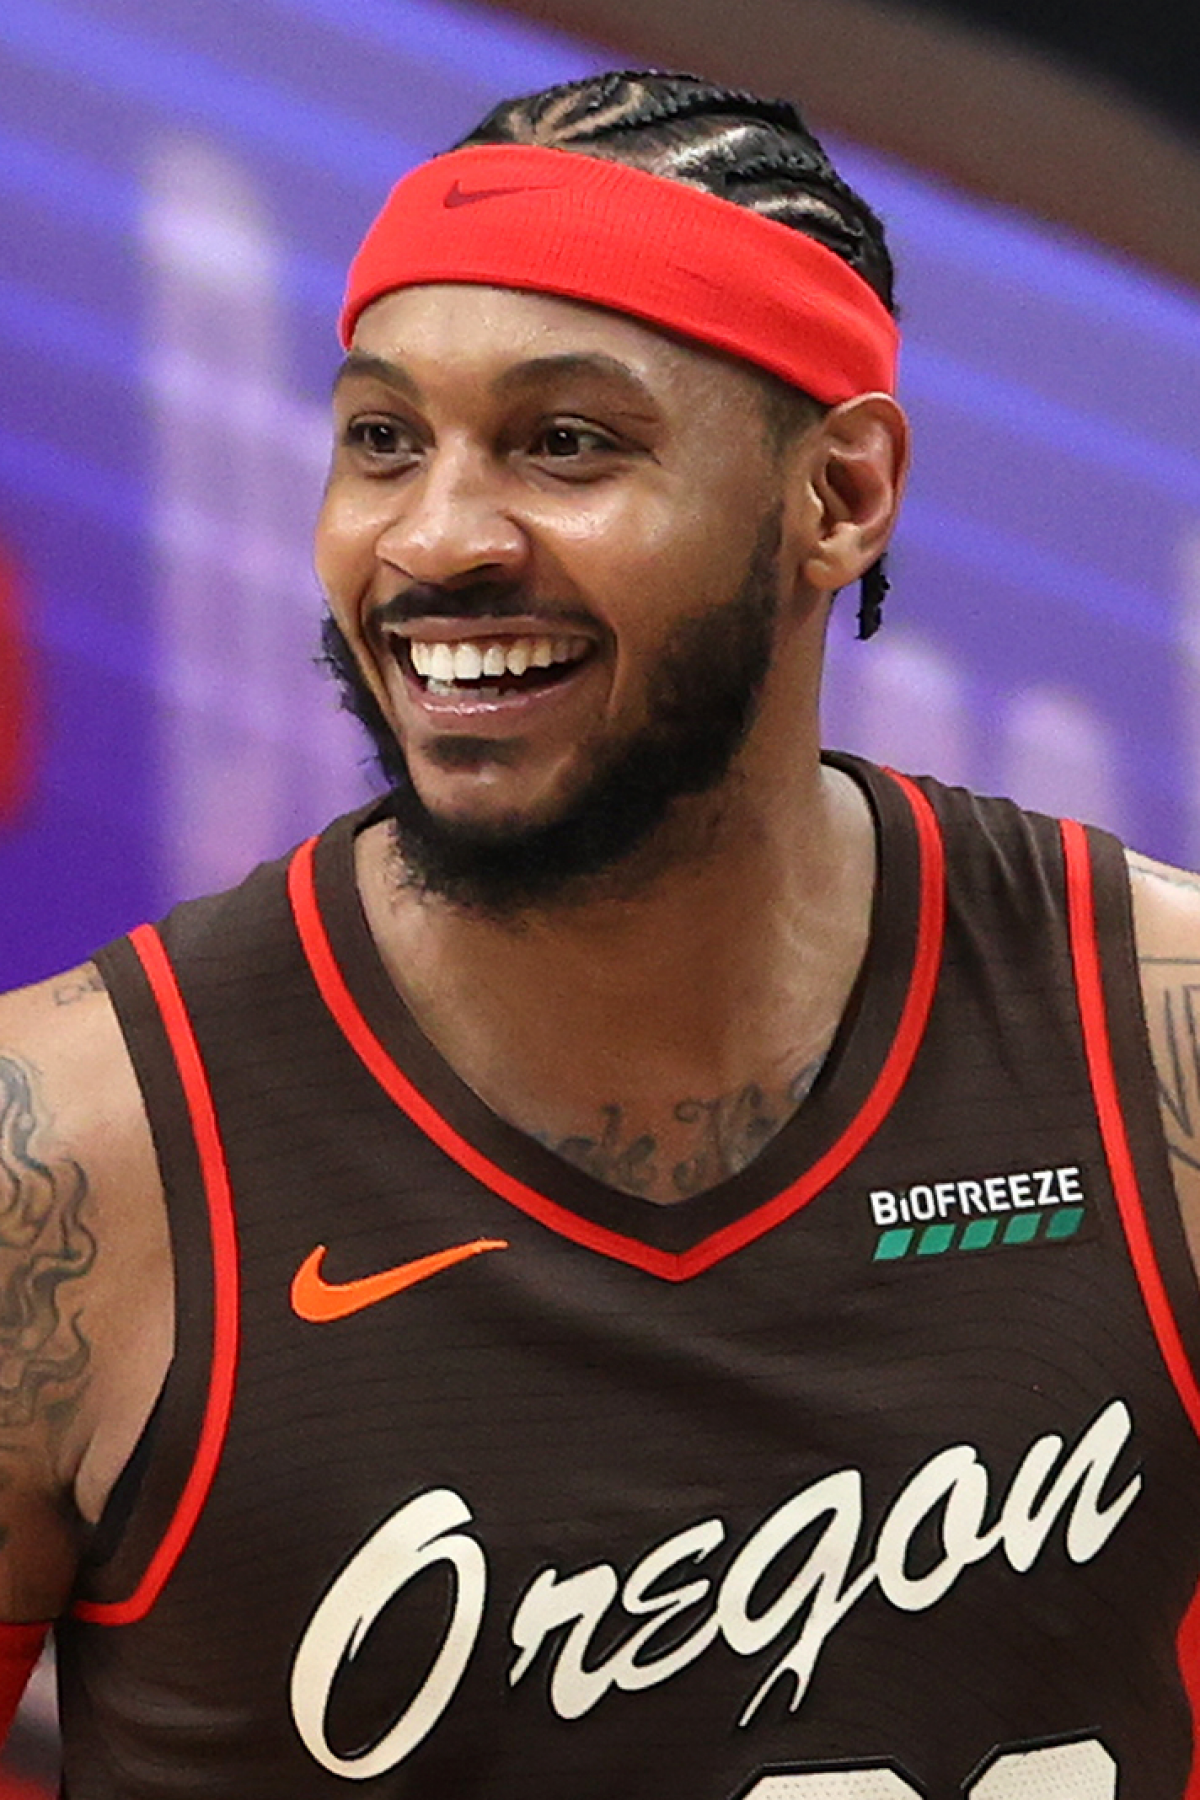 Carmelo Anthony #00 of the Portland Trail Blazers reacts in the fourth quarter against the Golden State Warriors at Moda Center on March 03, 2021 in Portland, Oregon. Photo by Abbie Parr/Getty Images